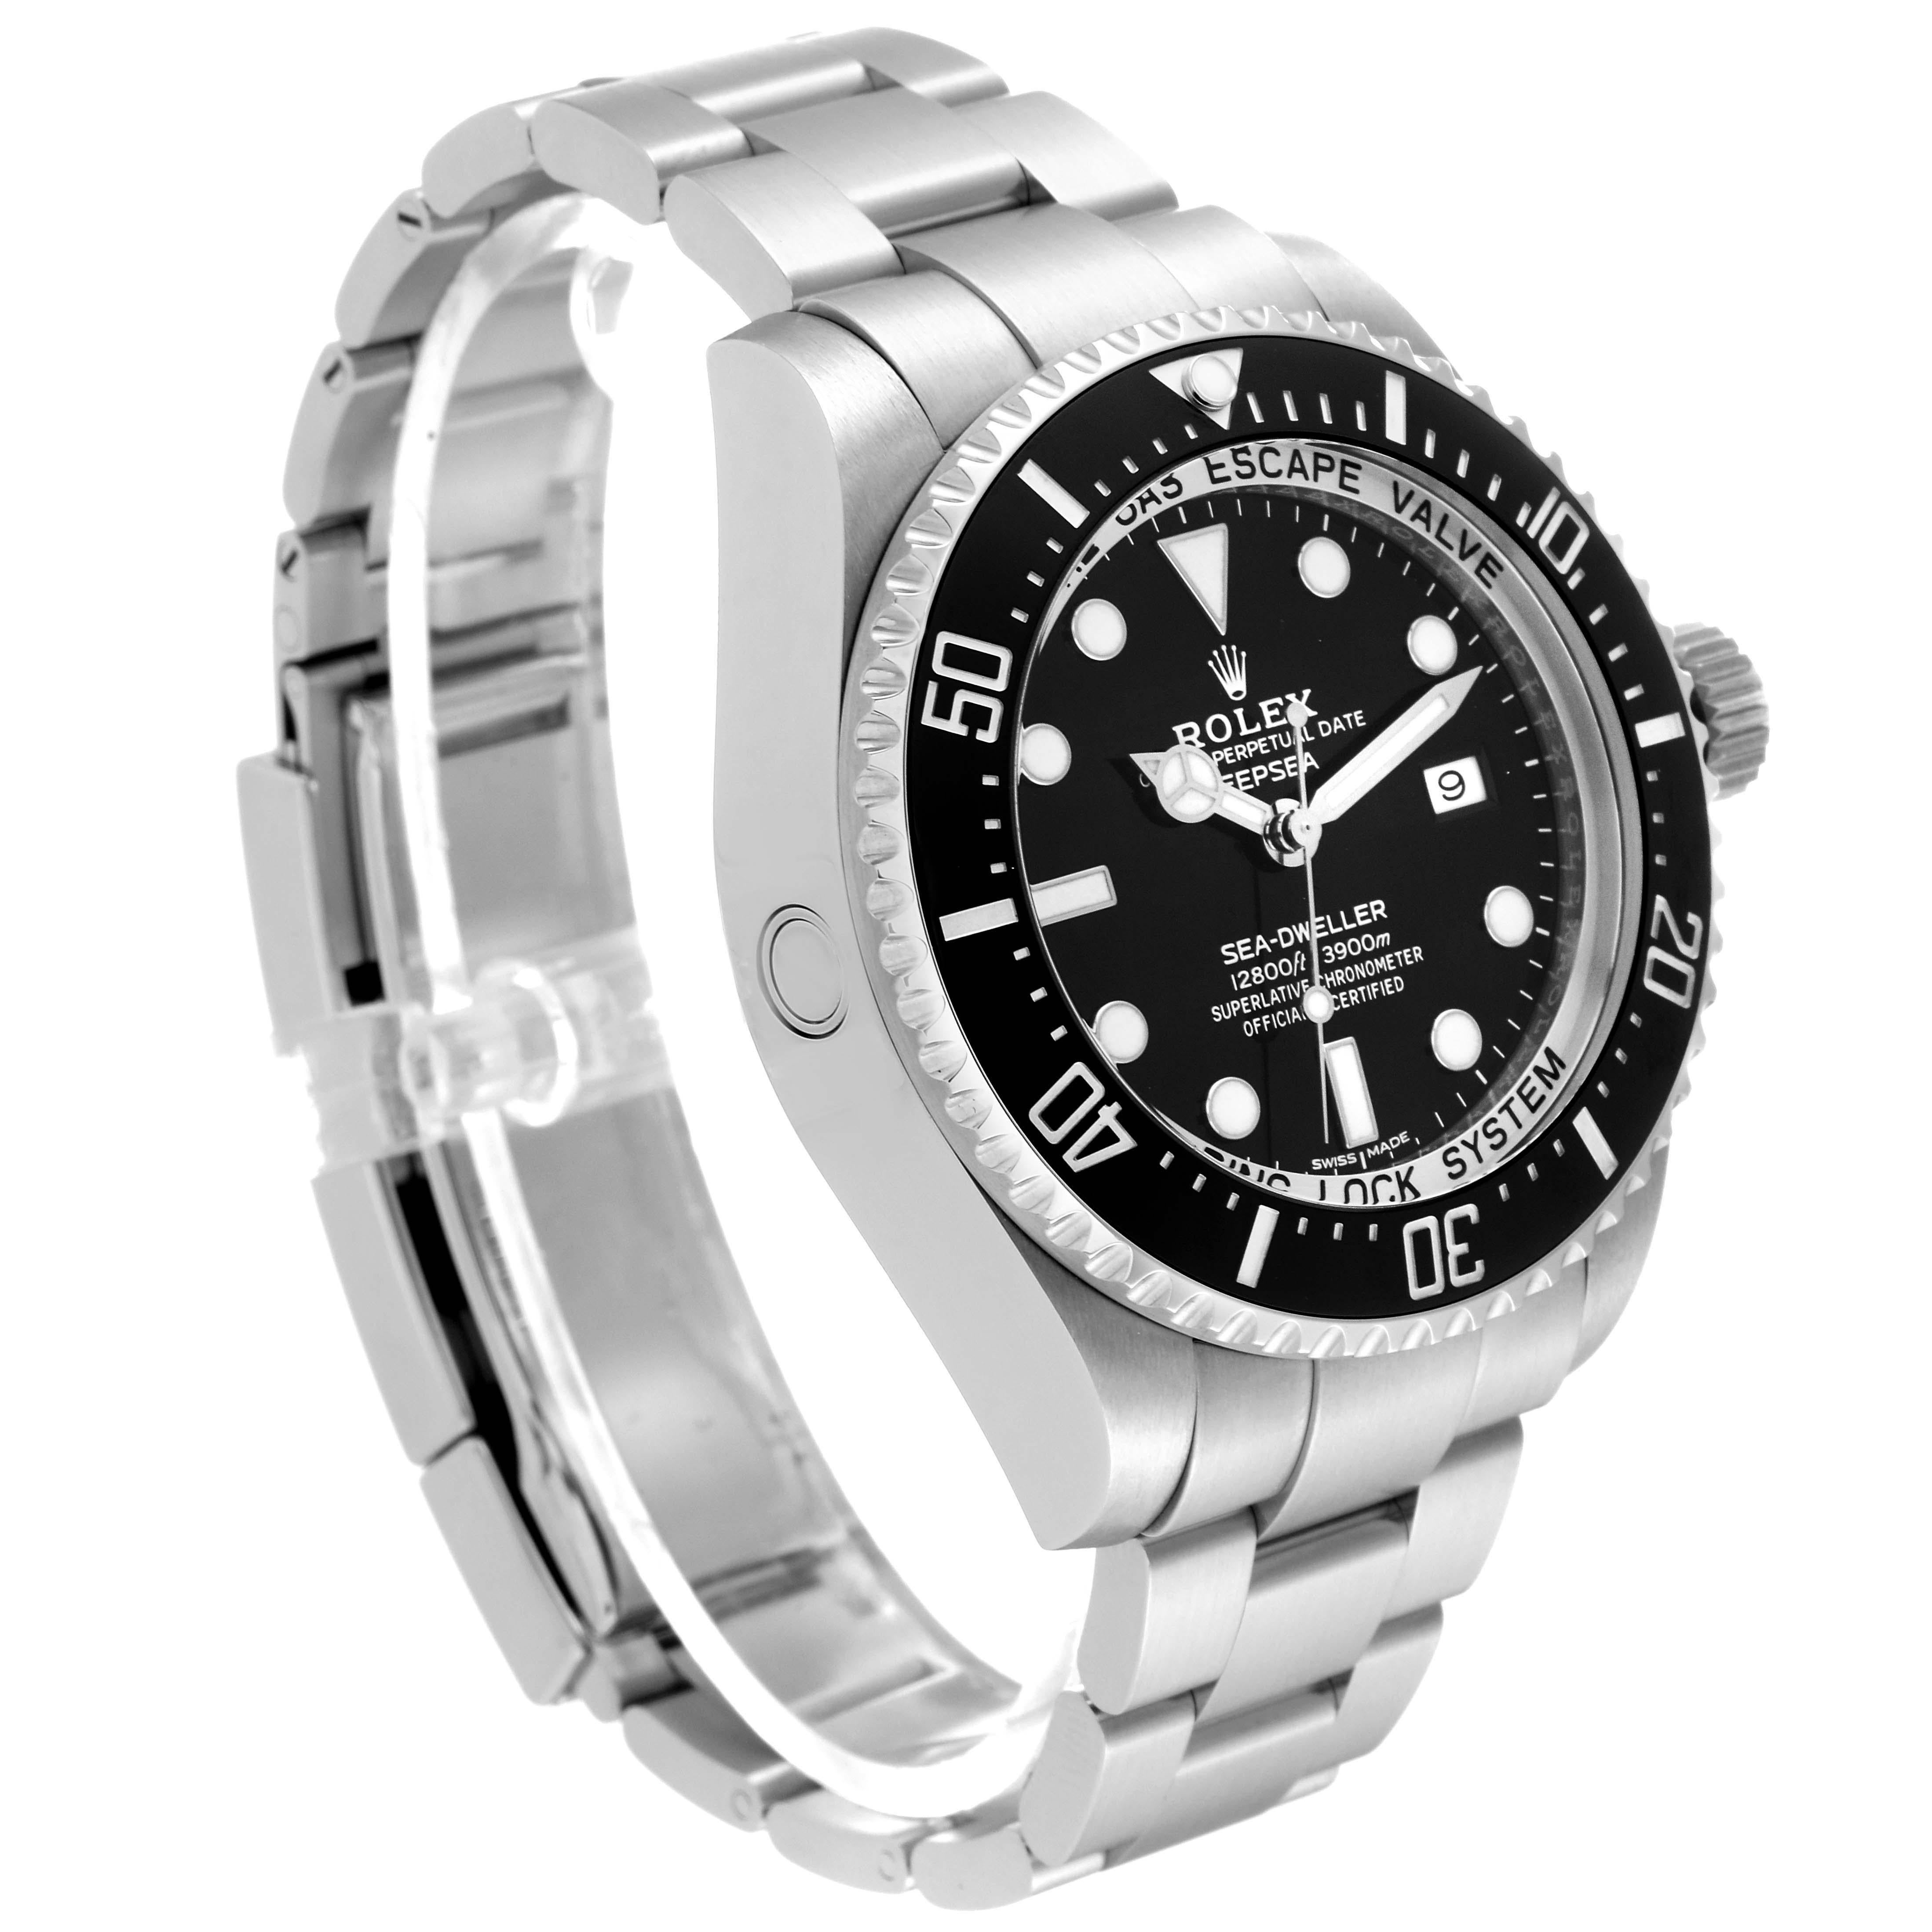 Rolex Seadweller Deepsea Ceramic Bezel Steel Mens Watch 116660 Box Card. Officially certified chronometer automatic self-winding movement. Stainless steel oyster case 44.0 mm in diameter. Rolex logo on the crown. Special time-lapse unidirectional